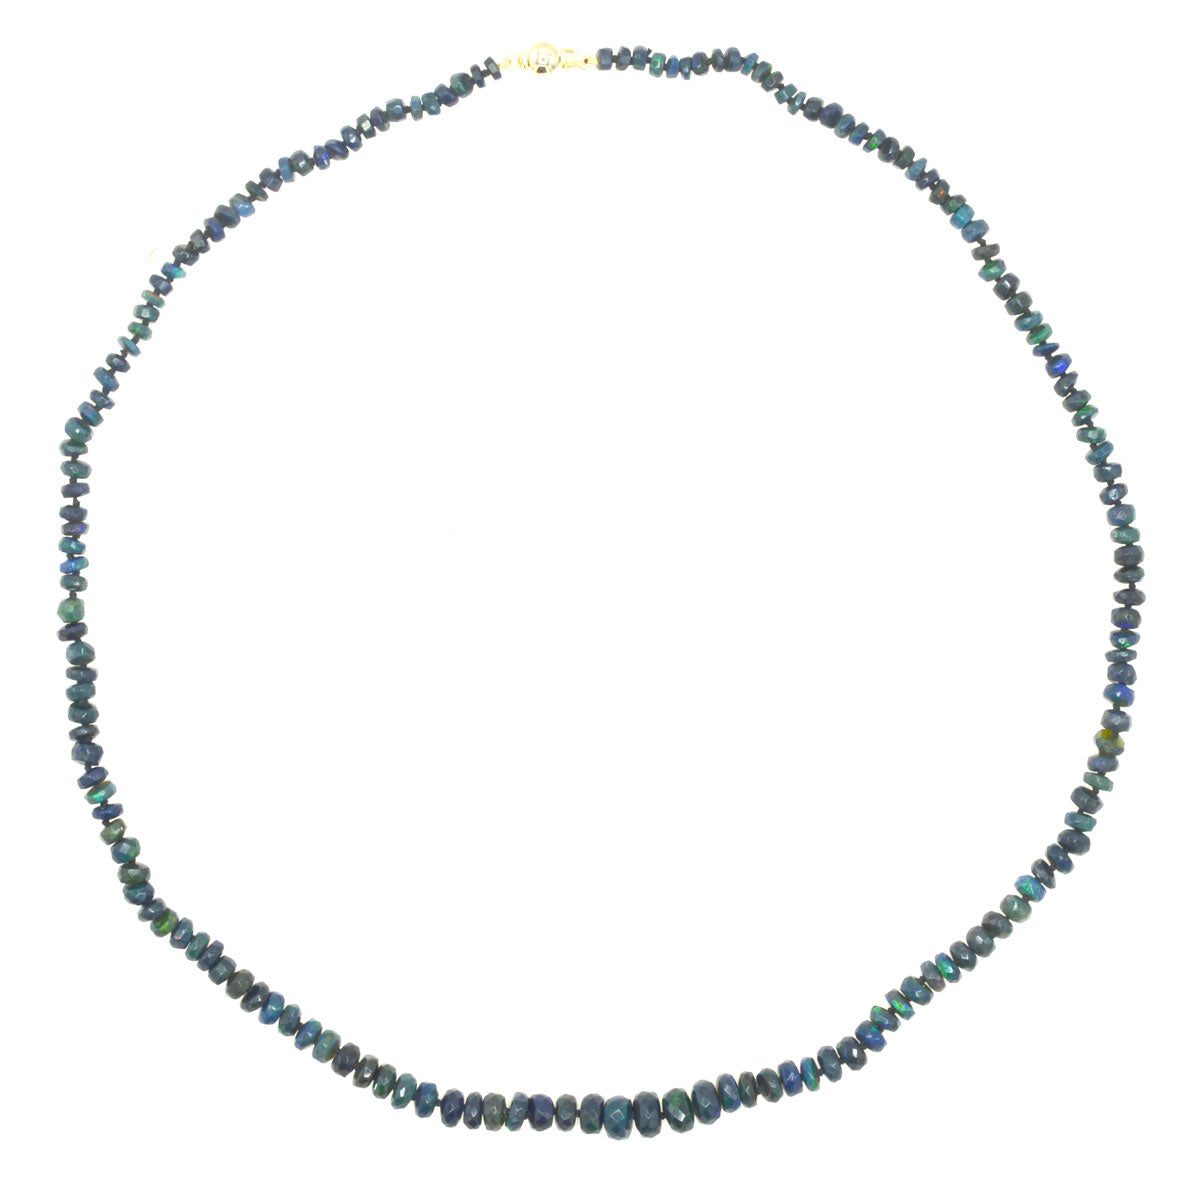 Beaded Mini Ethiopian Opal Necklace - Black with Blue/Green Flashes